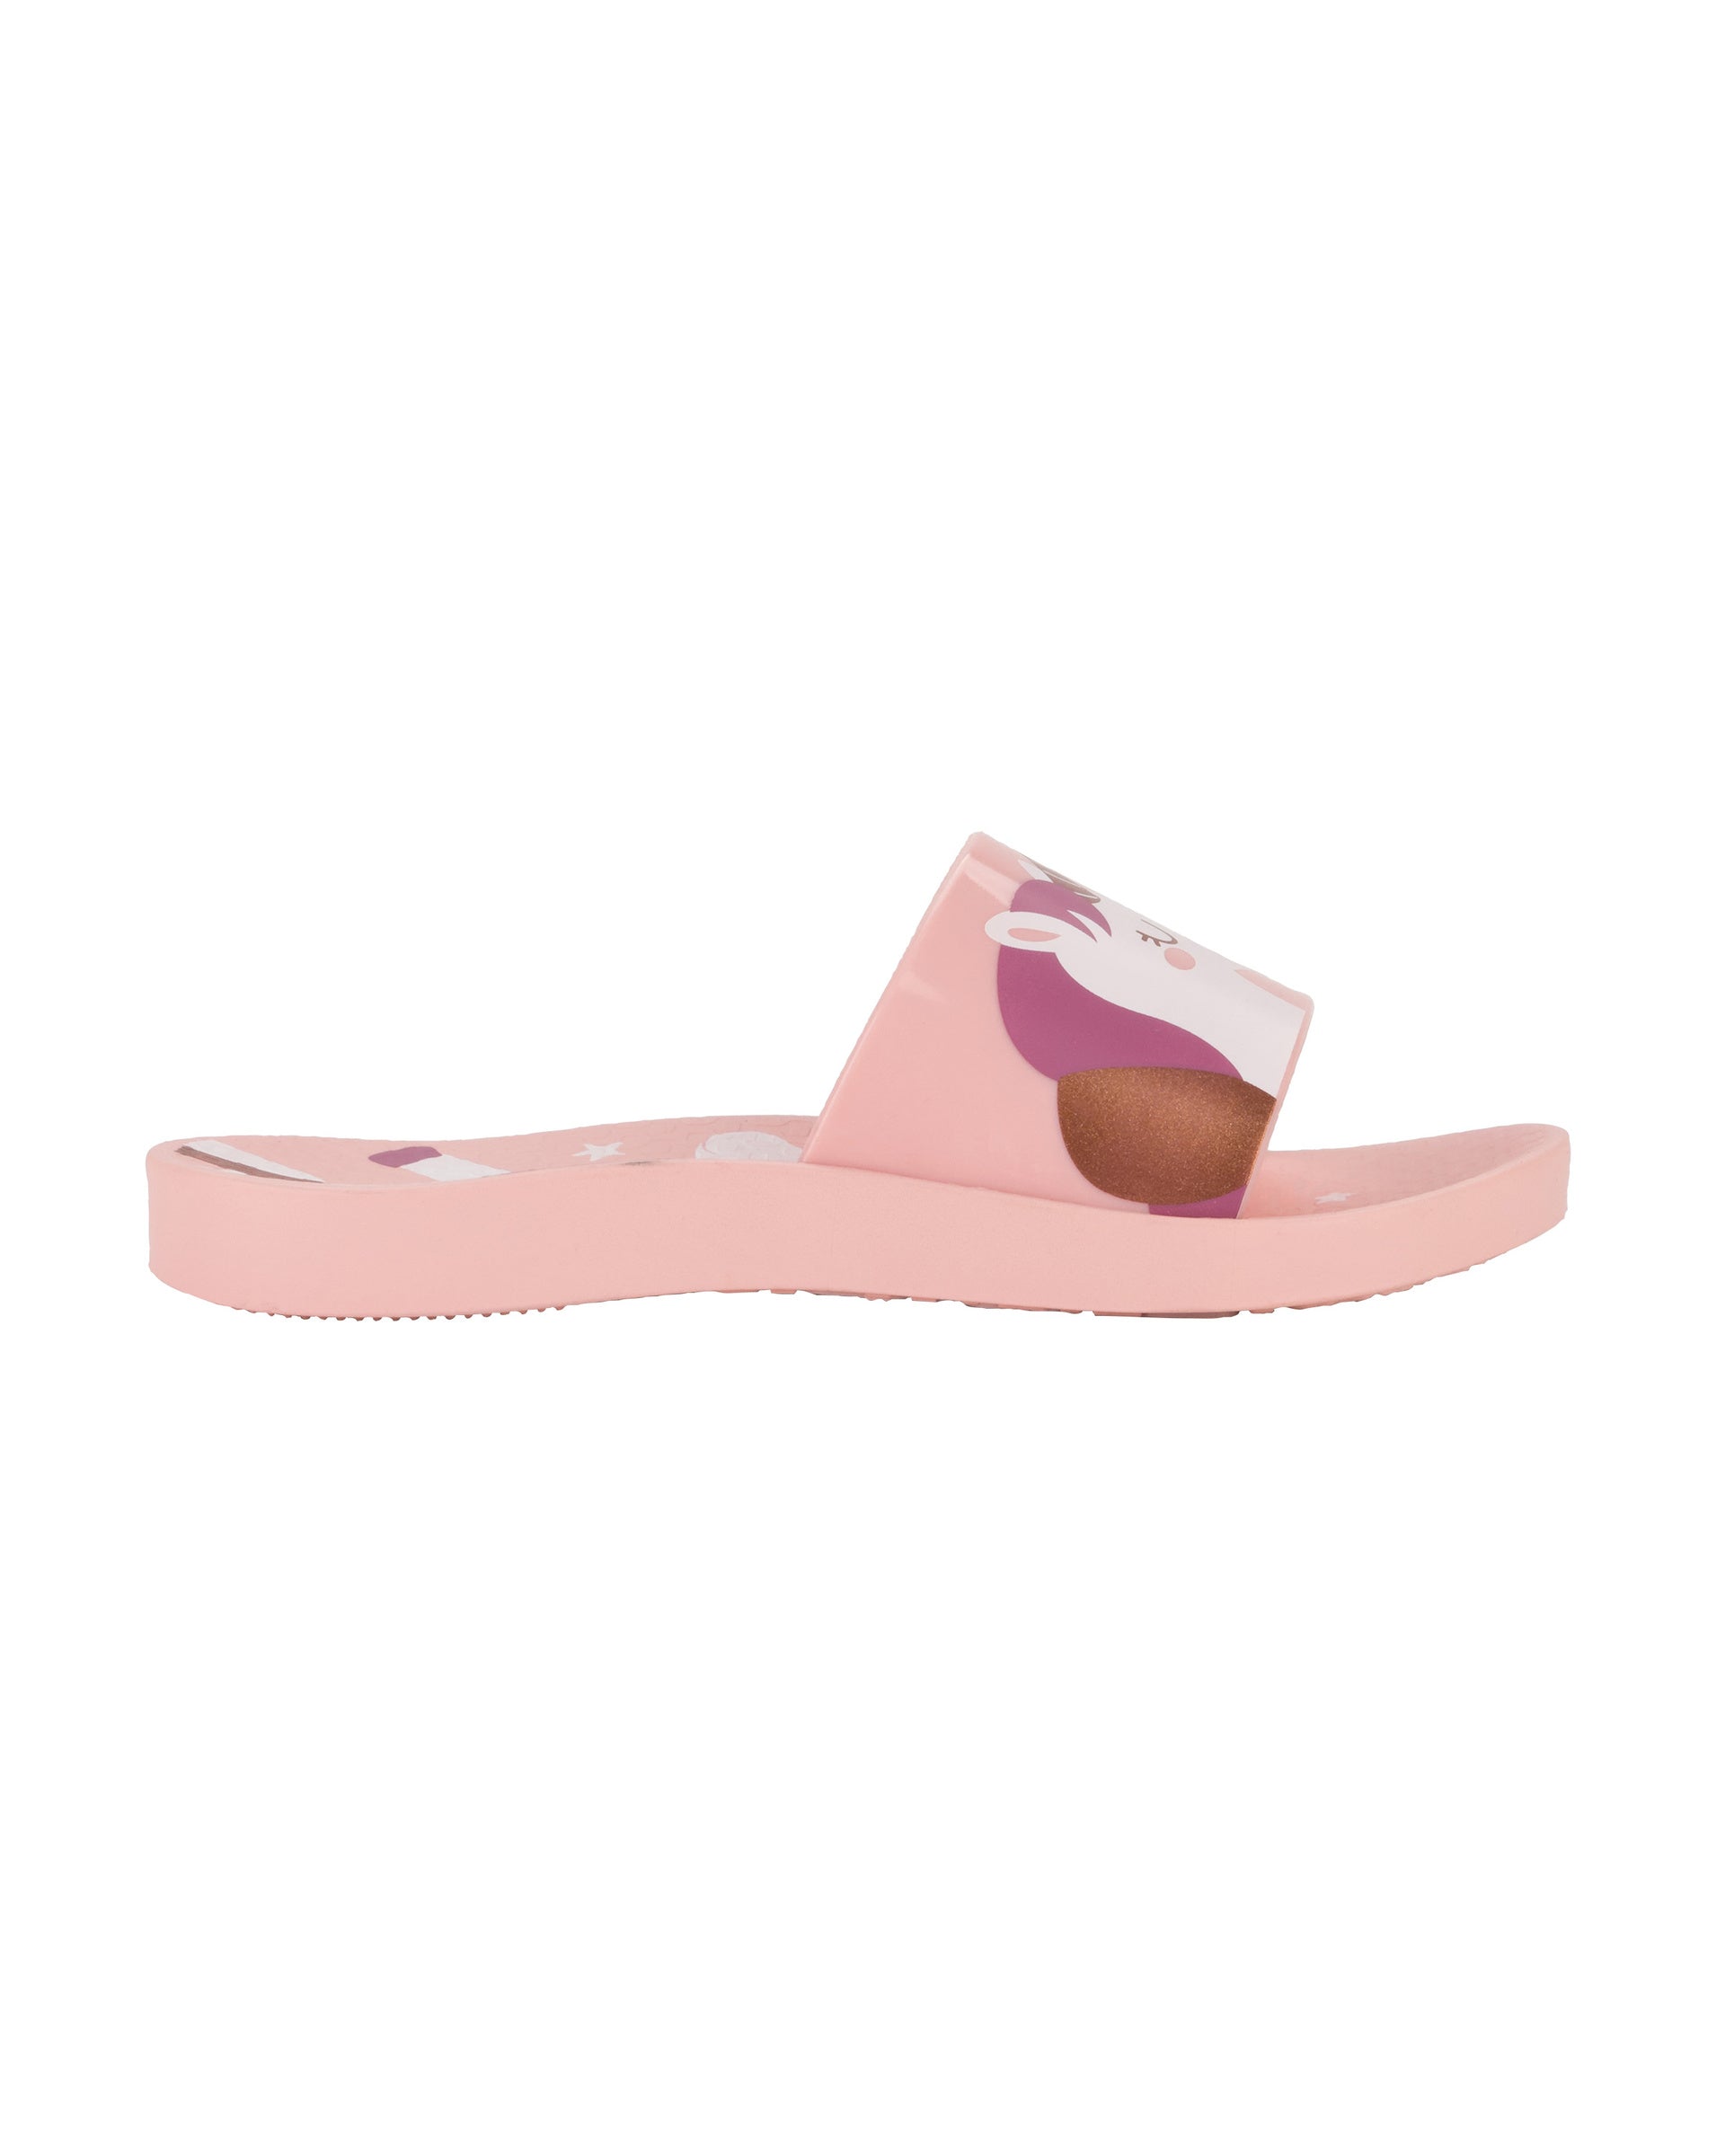 Outer side view of a pink Ipanema Urban kids slide with a unicorn on the upper.